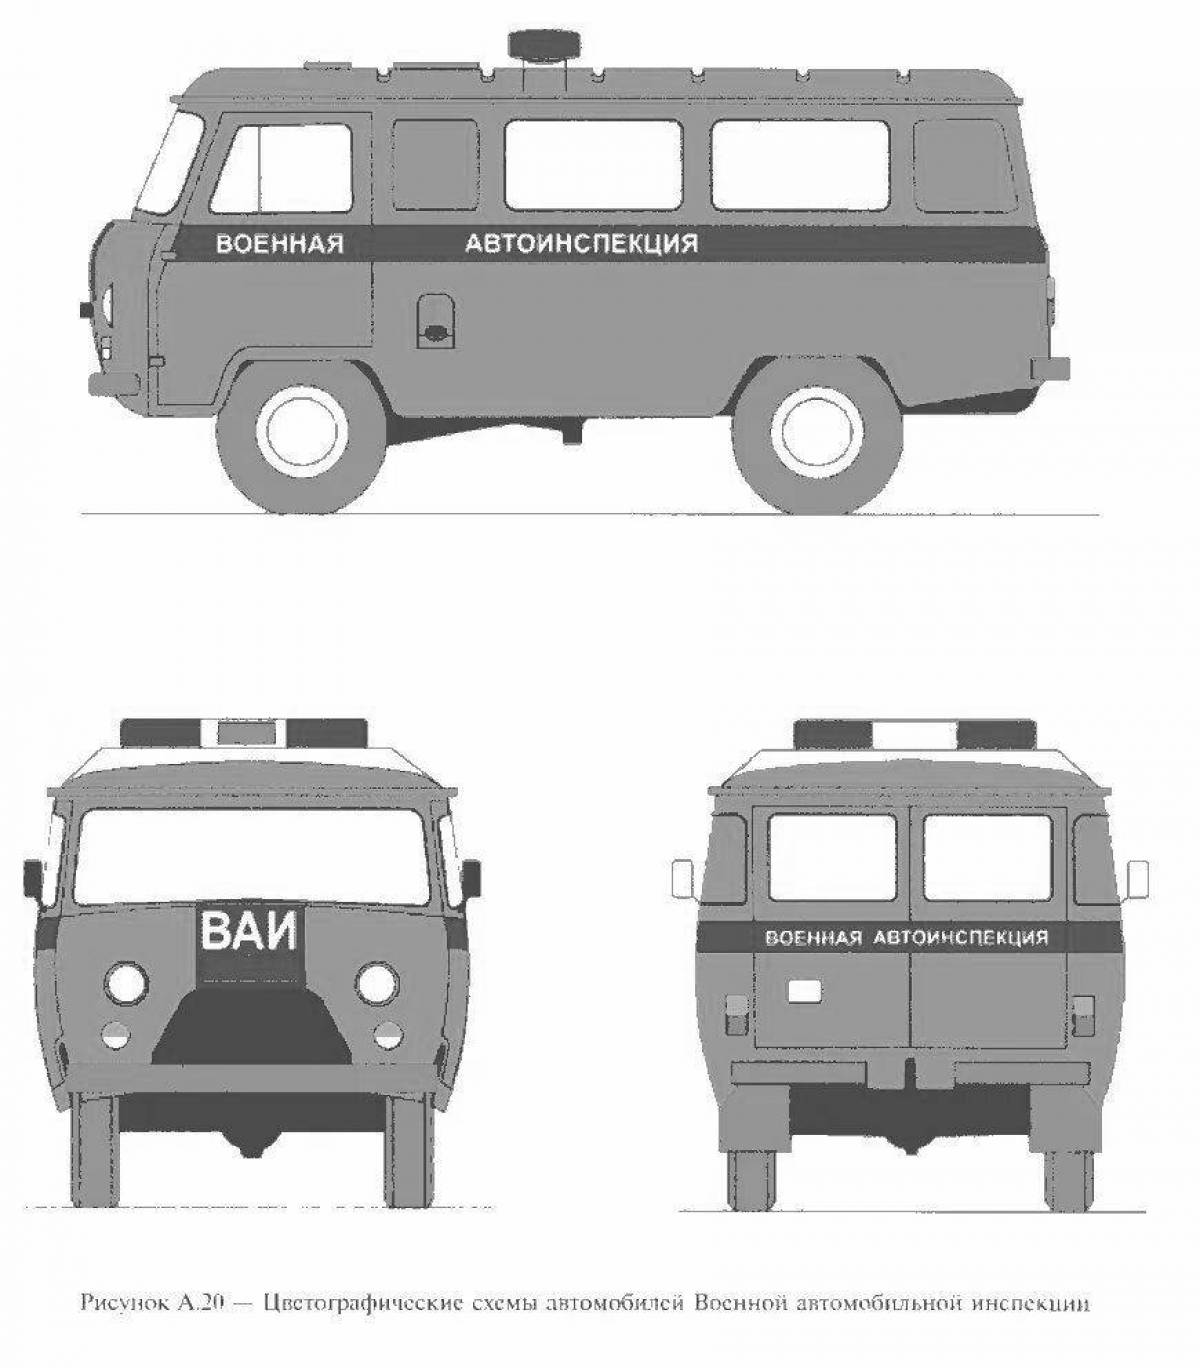 Attractive UAZ loaf coloring book for kids